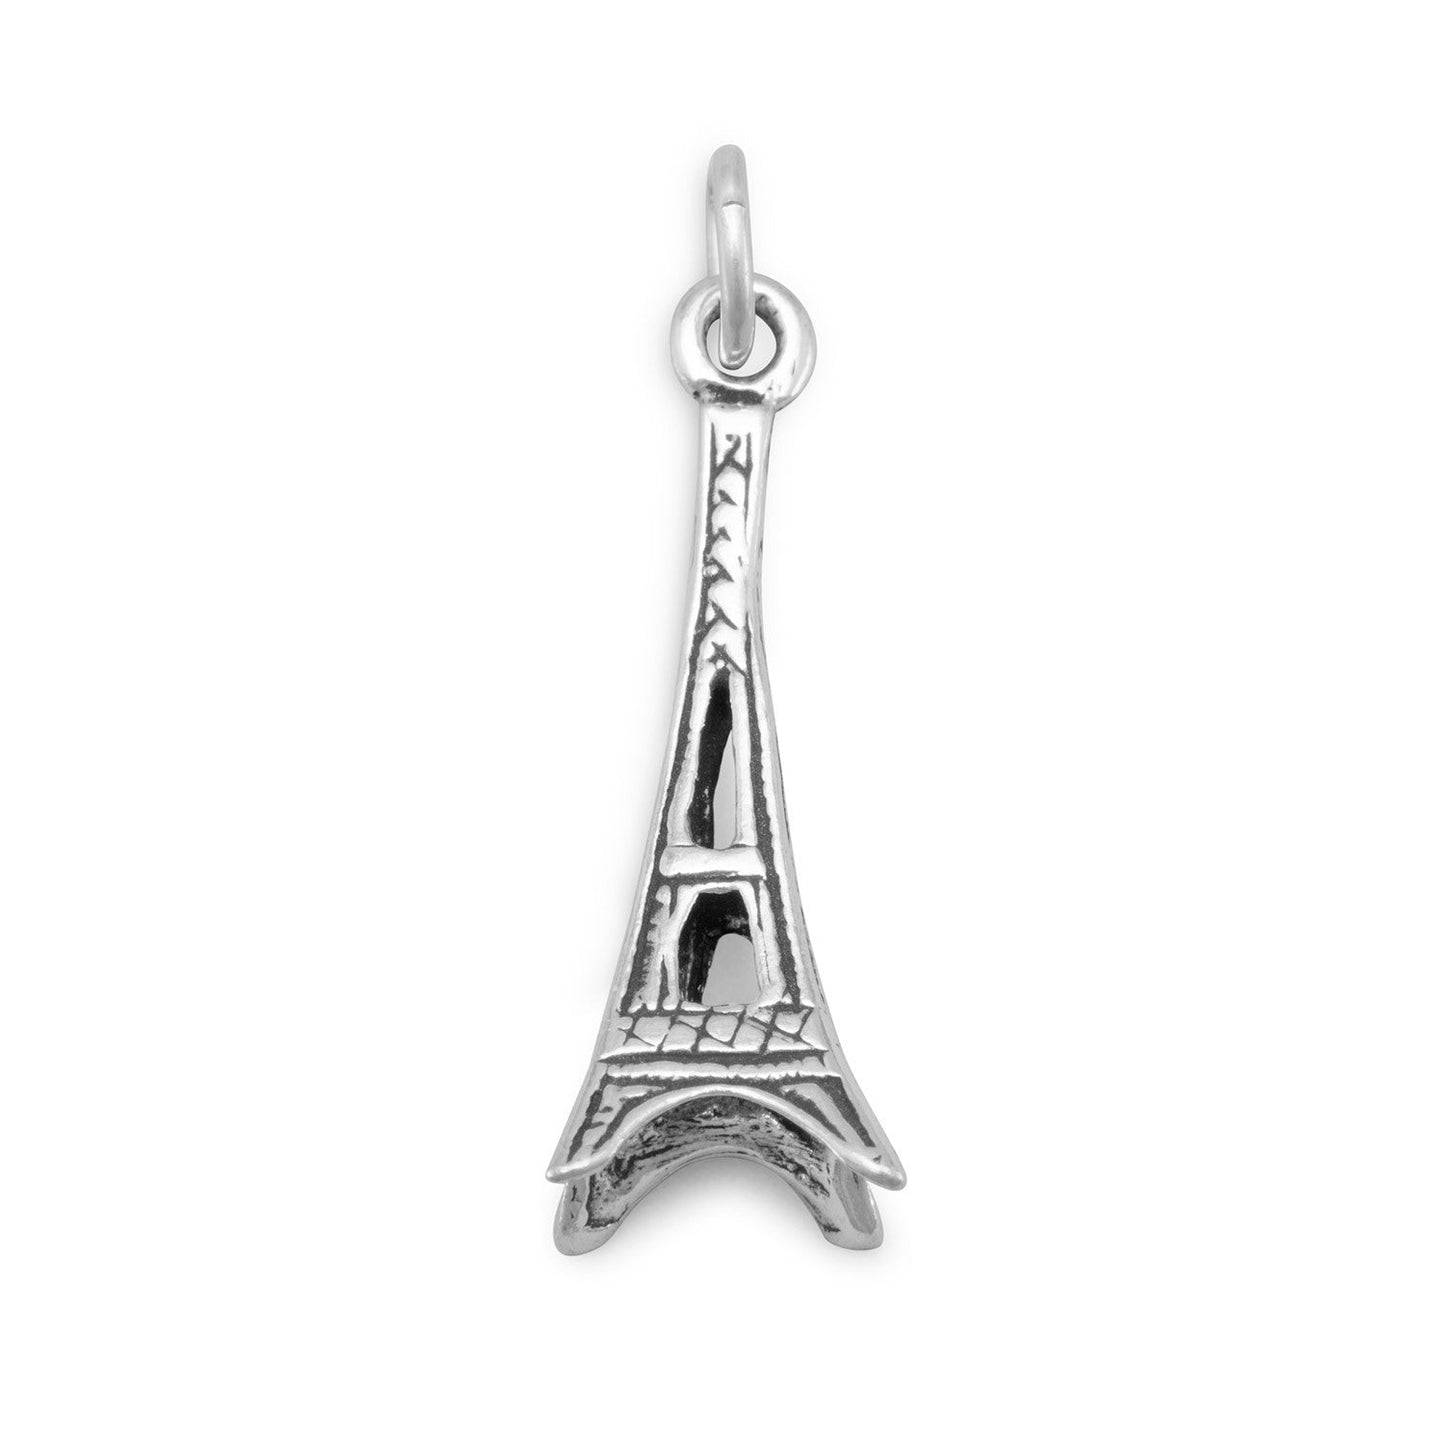 Oxidized Sterling Silver Eiffel Tower Charm, Made in USA